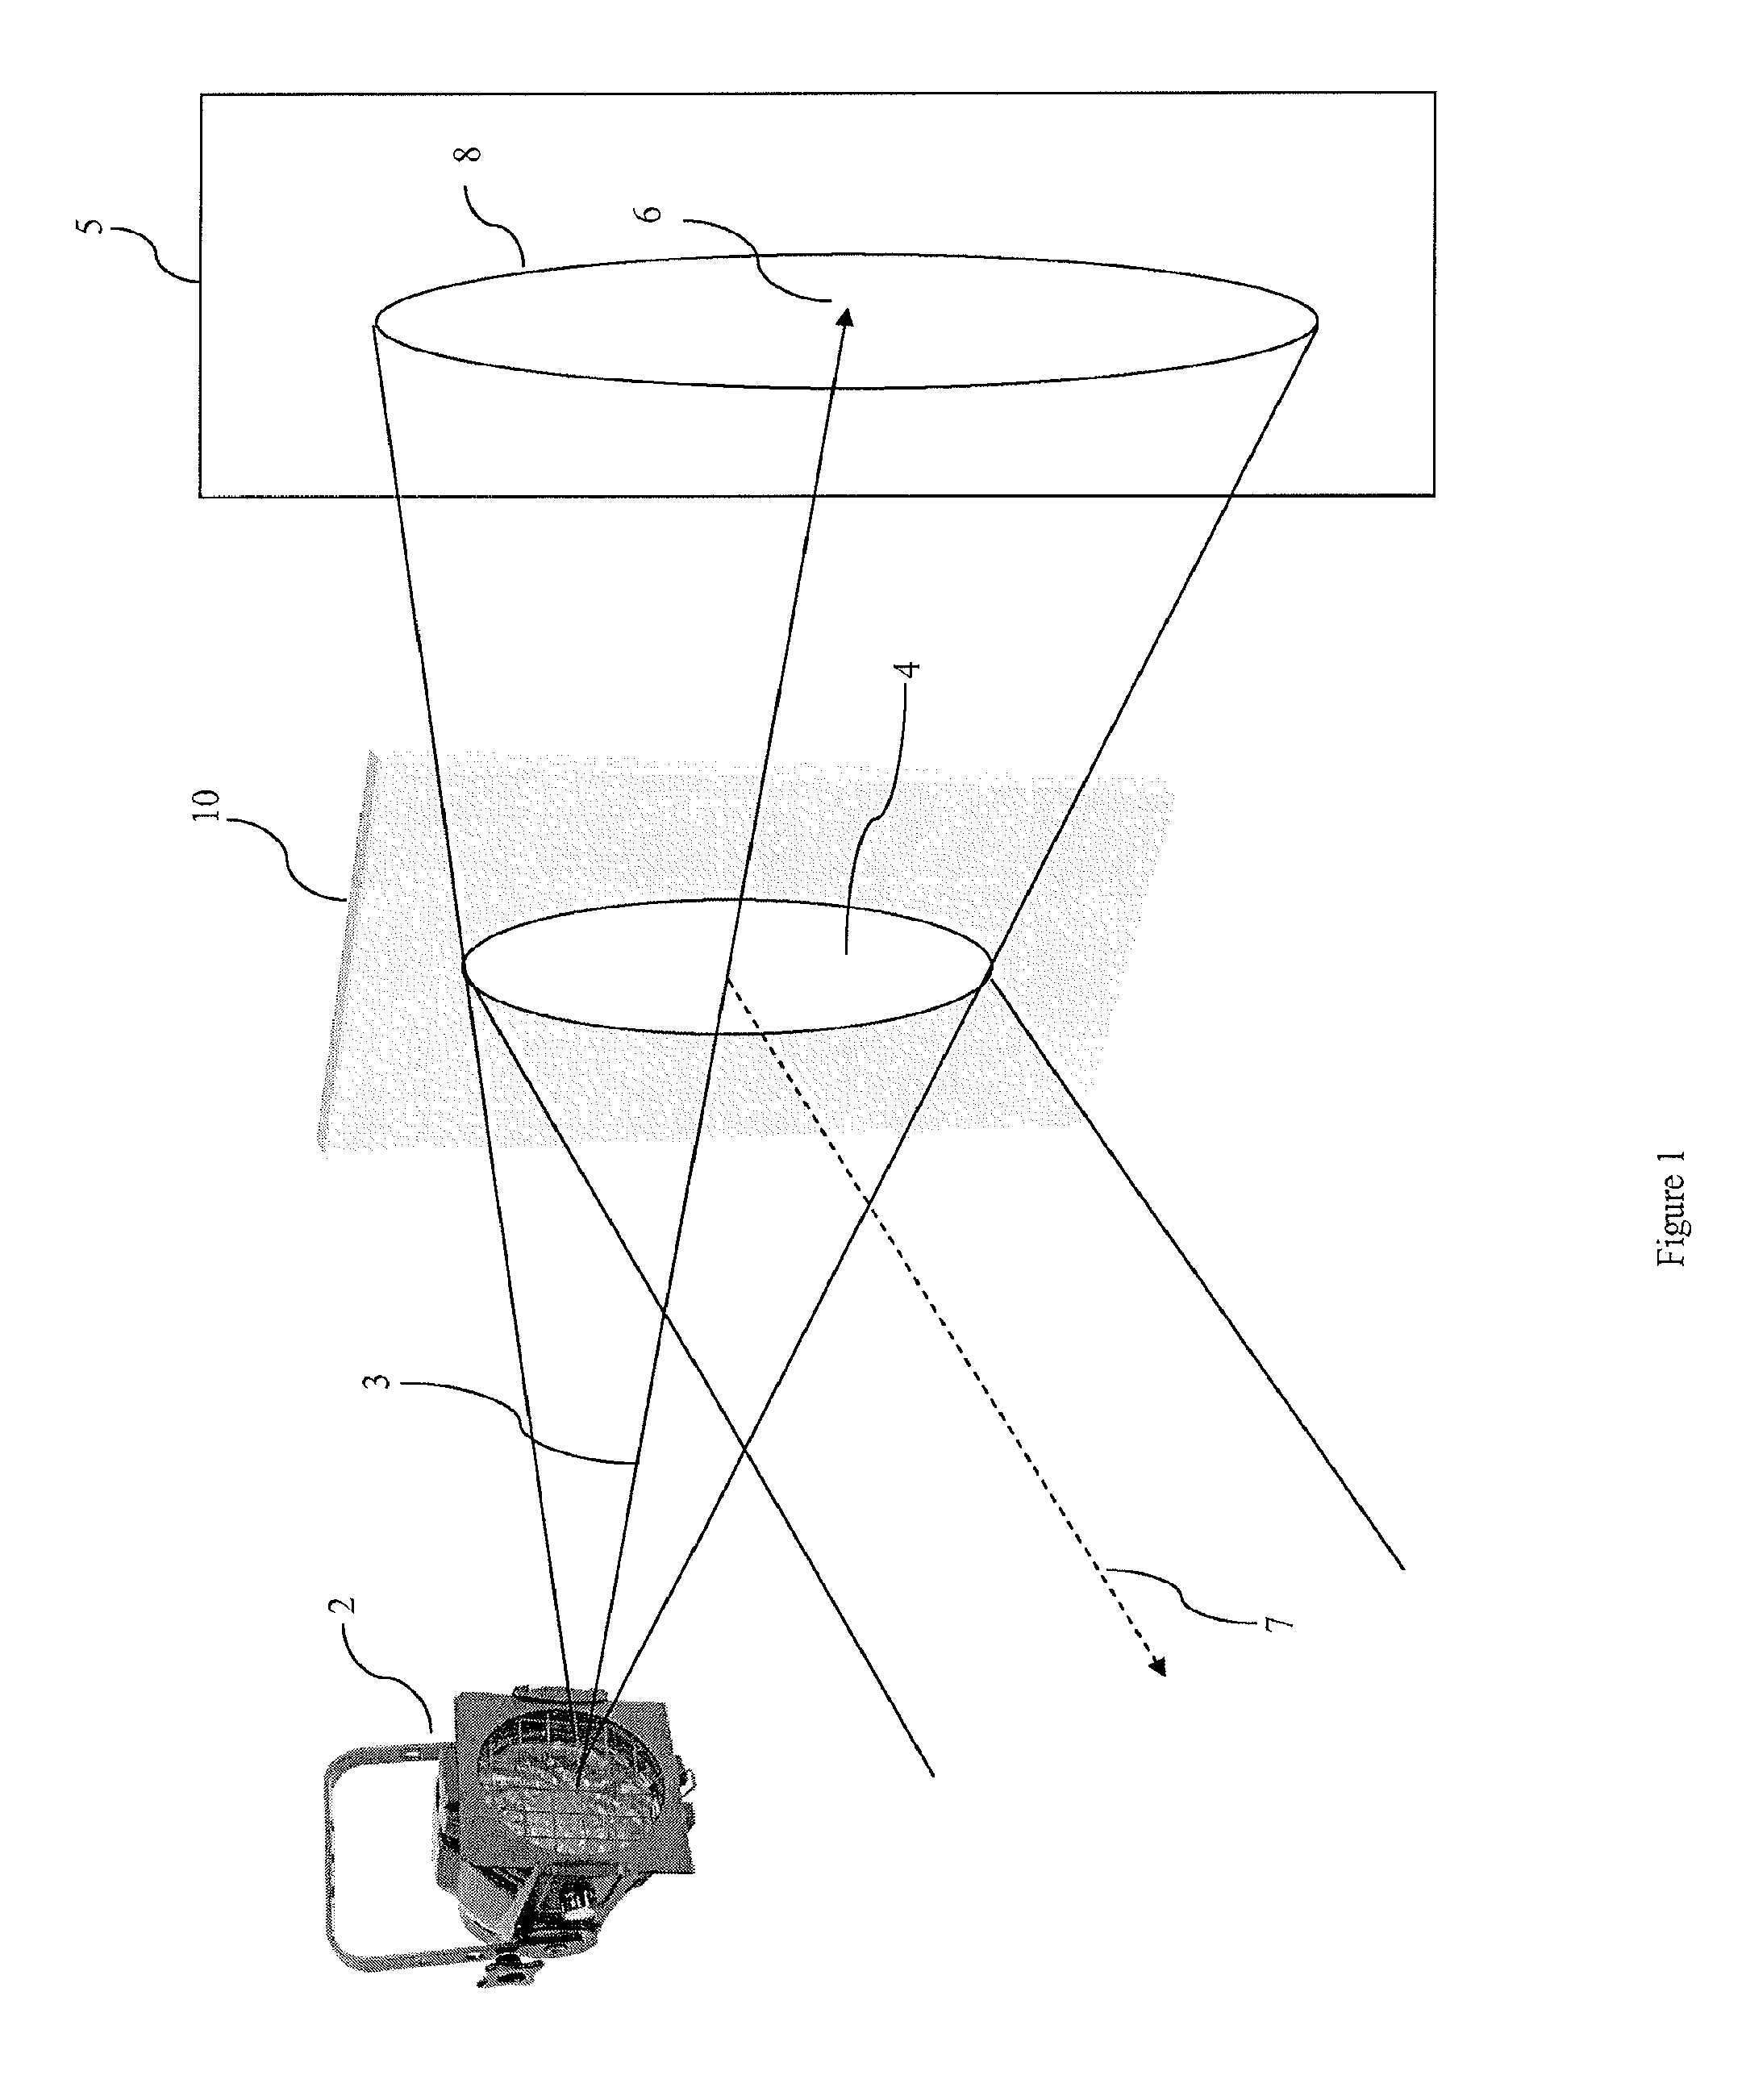 Method of Manufacturing Foil for Producing a Pepper's Ghost Illusion